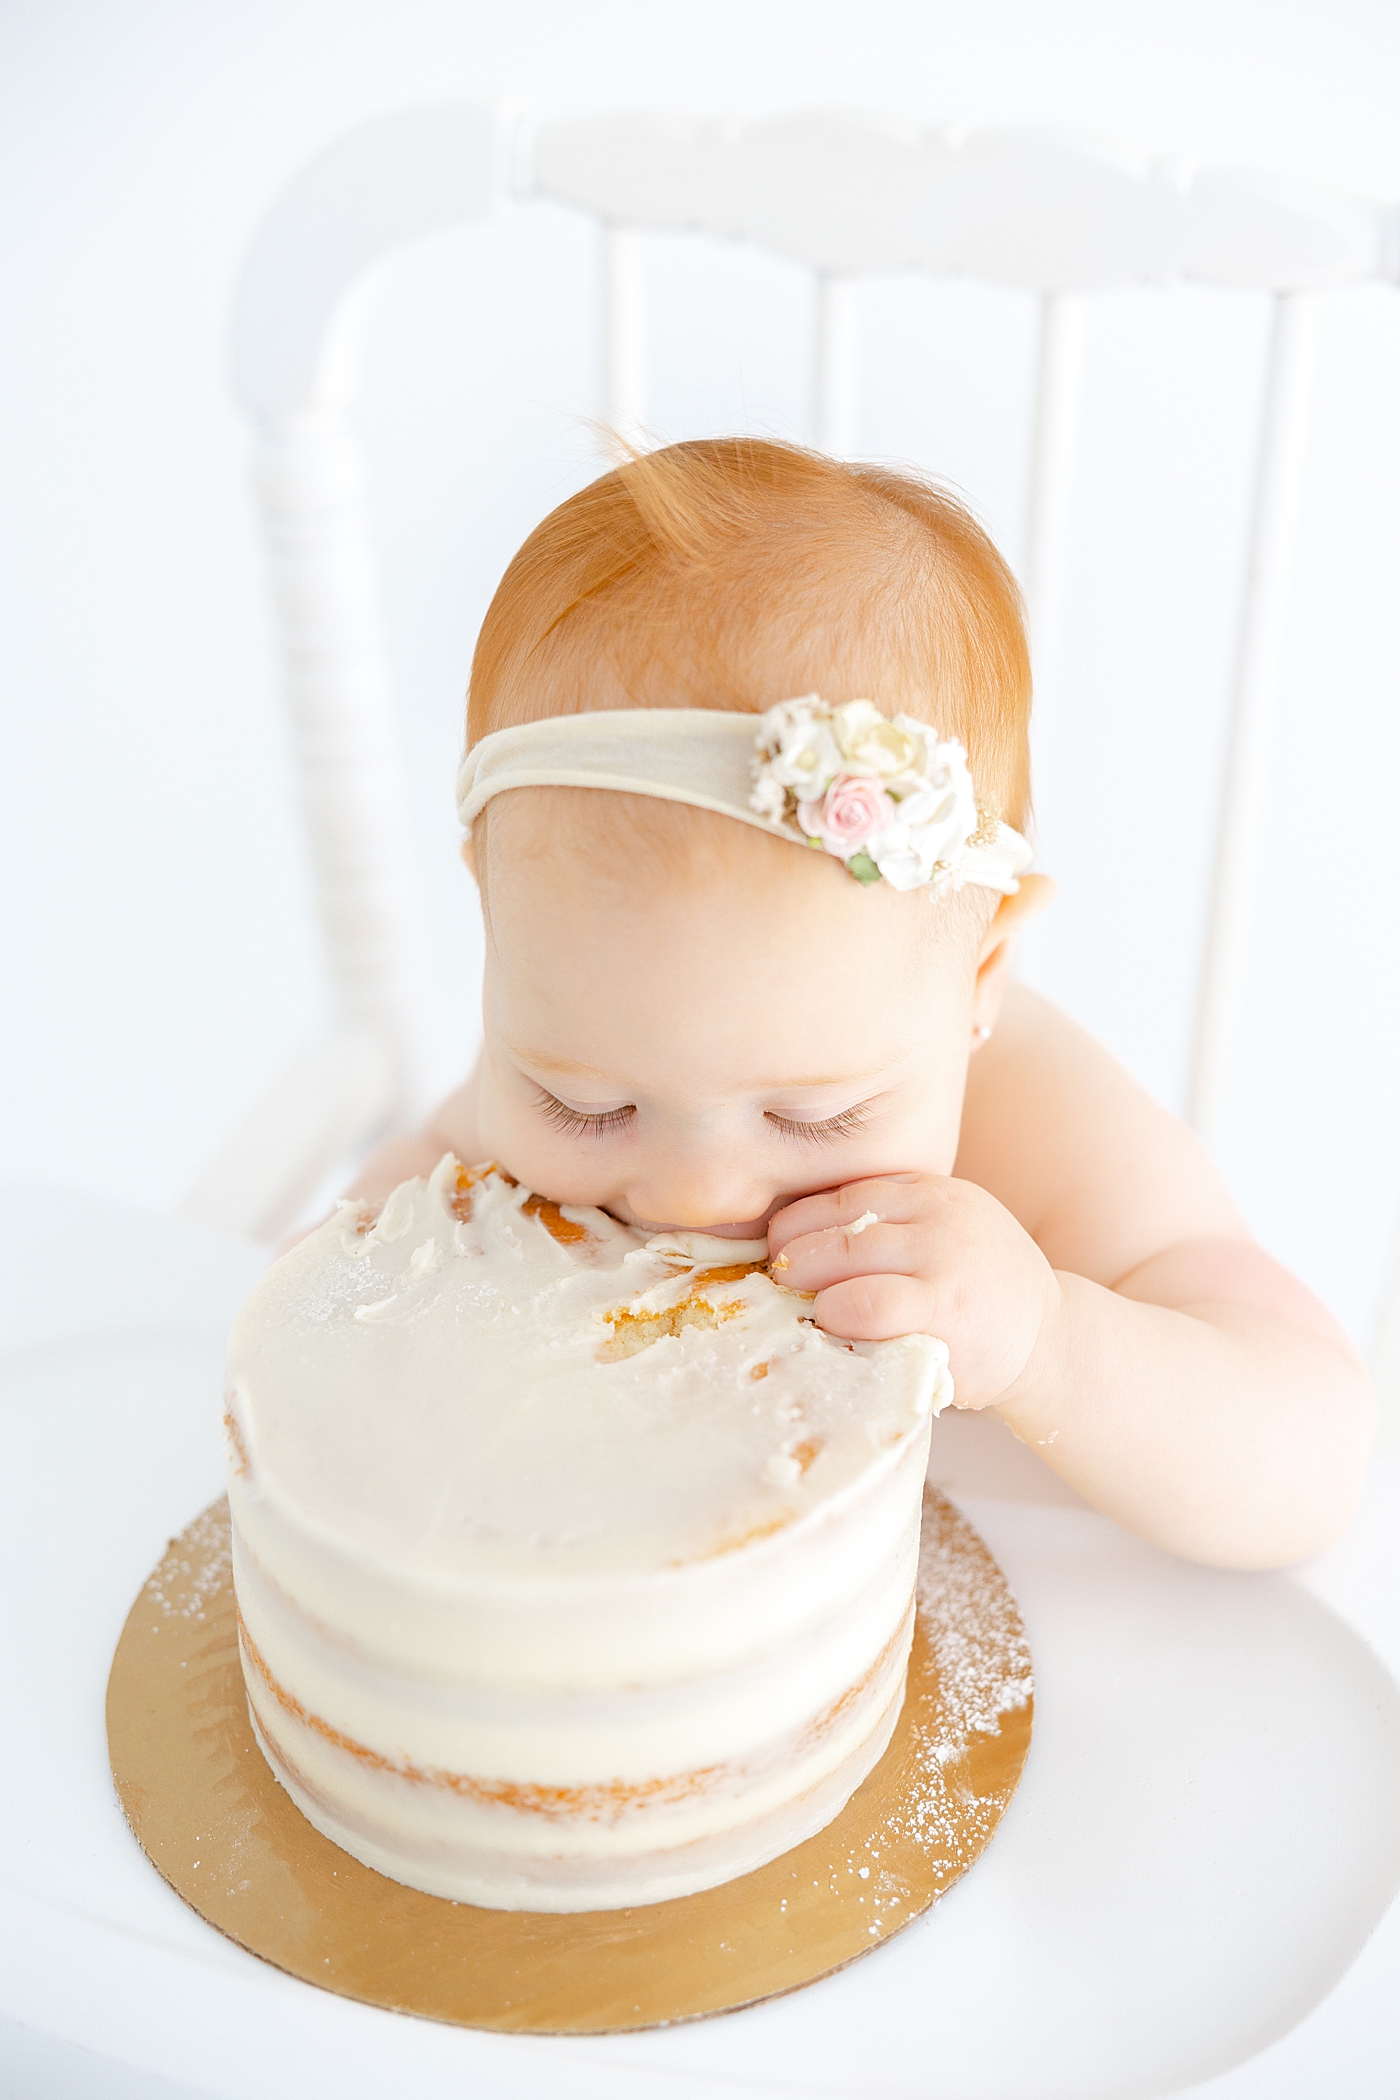 Redhead baby girl eating cake during her One Year Milestone Collection | Image by Sana Ahmed Photography